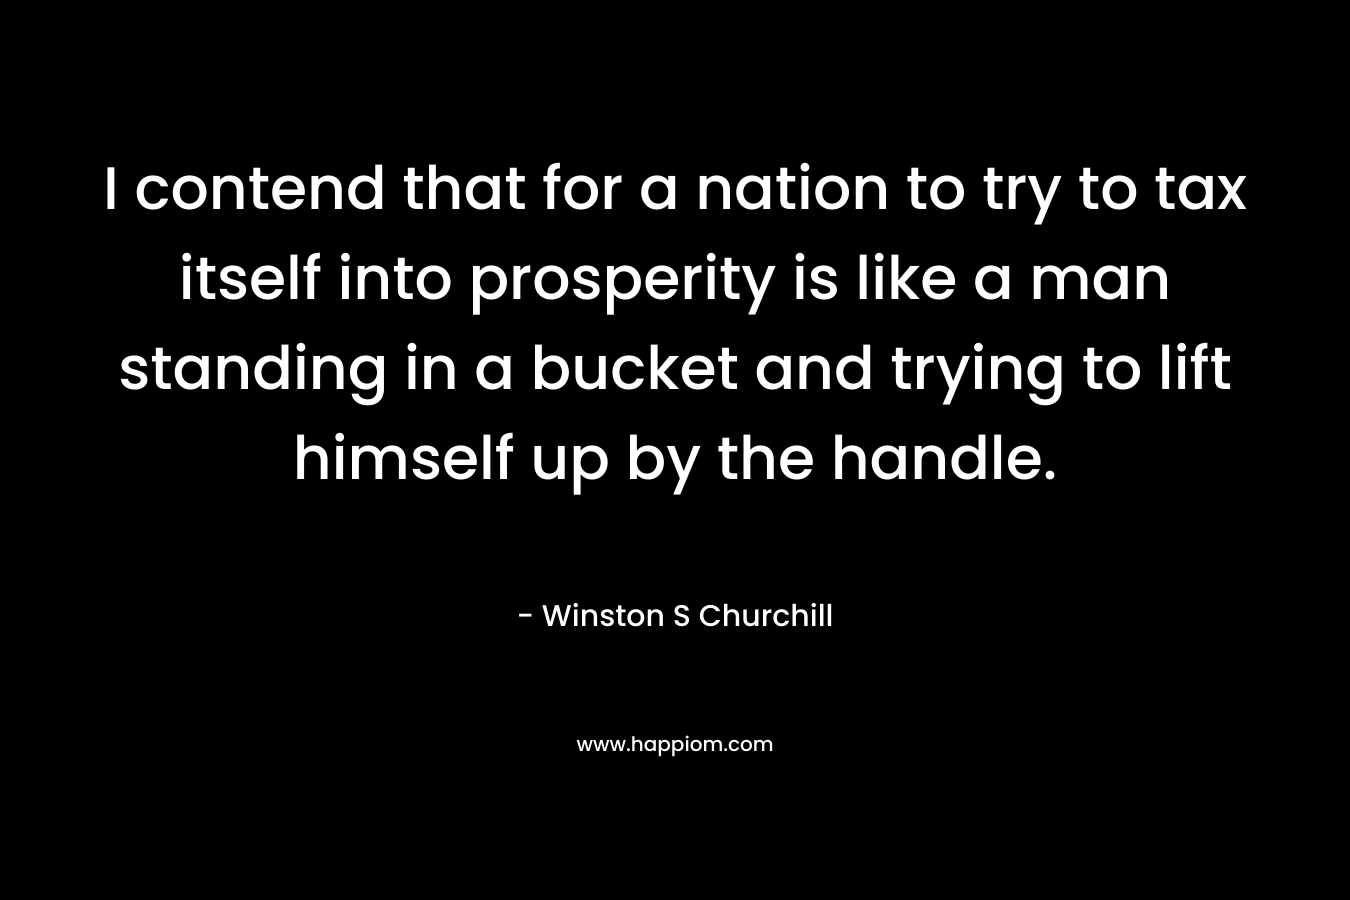 I contend that for a nation to try to tax itself into prosperity is like a man standing in a bucket and trying to lift himself up by the handle. – Winston S Churchill